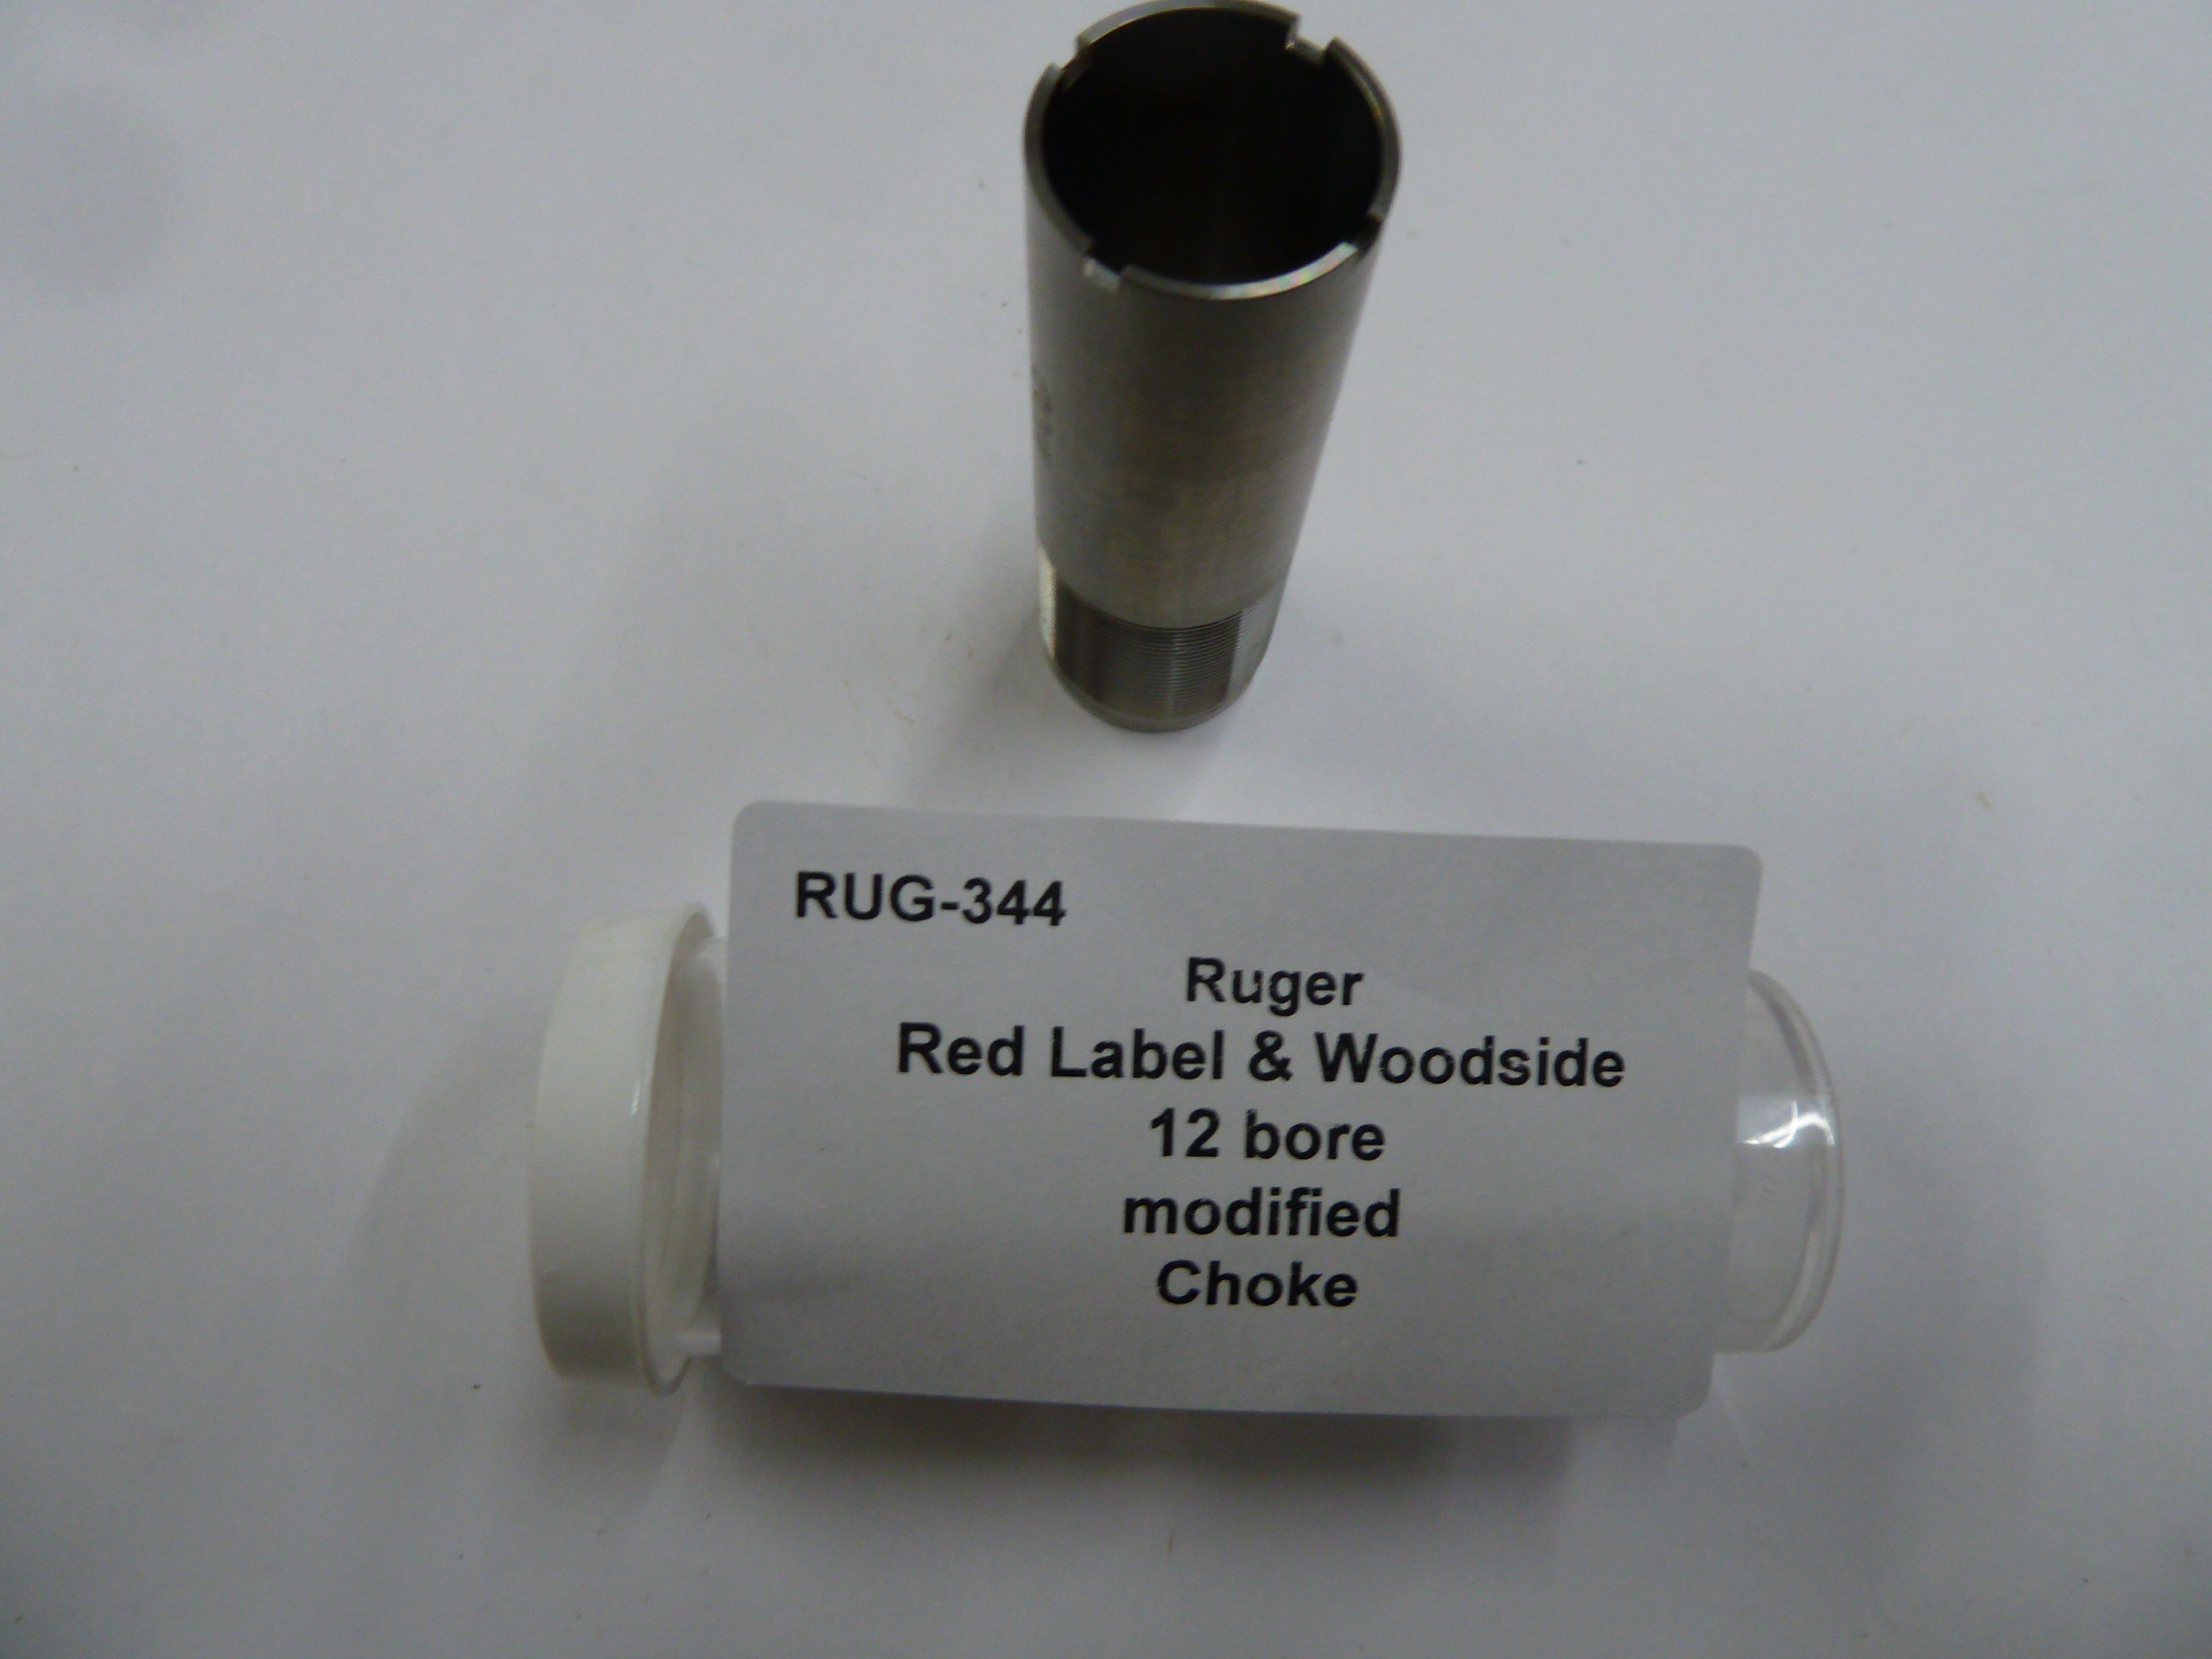 RUG-344 Ruger red label and woddside 12 bore modified choke (3)